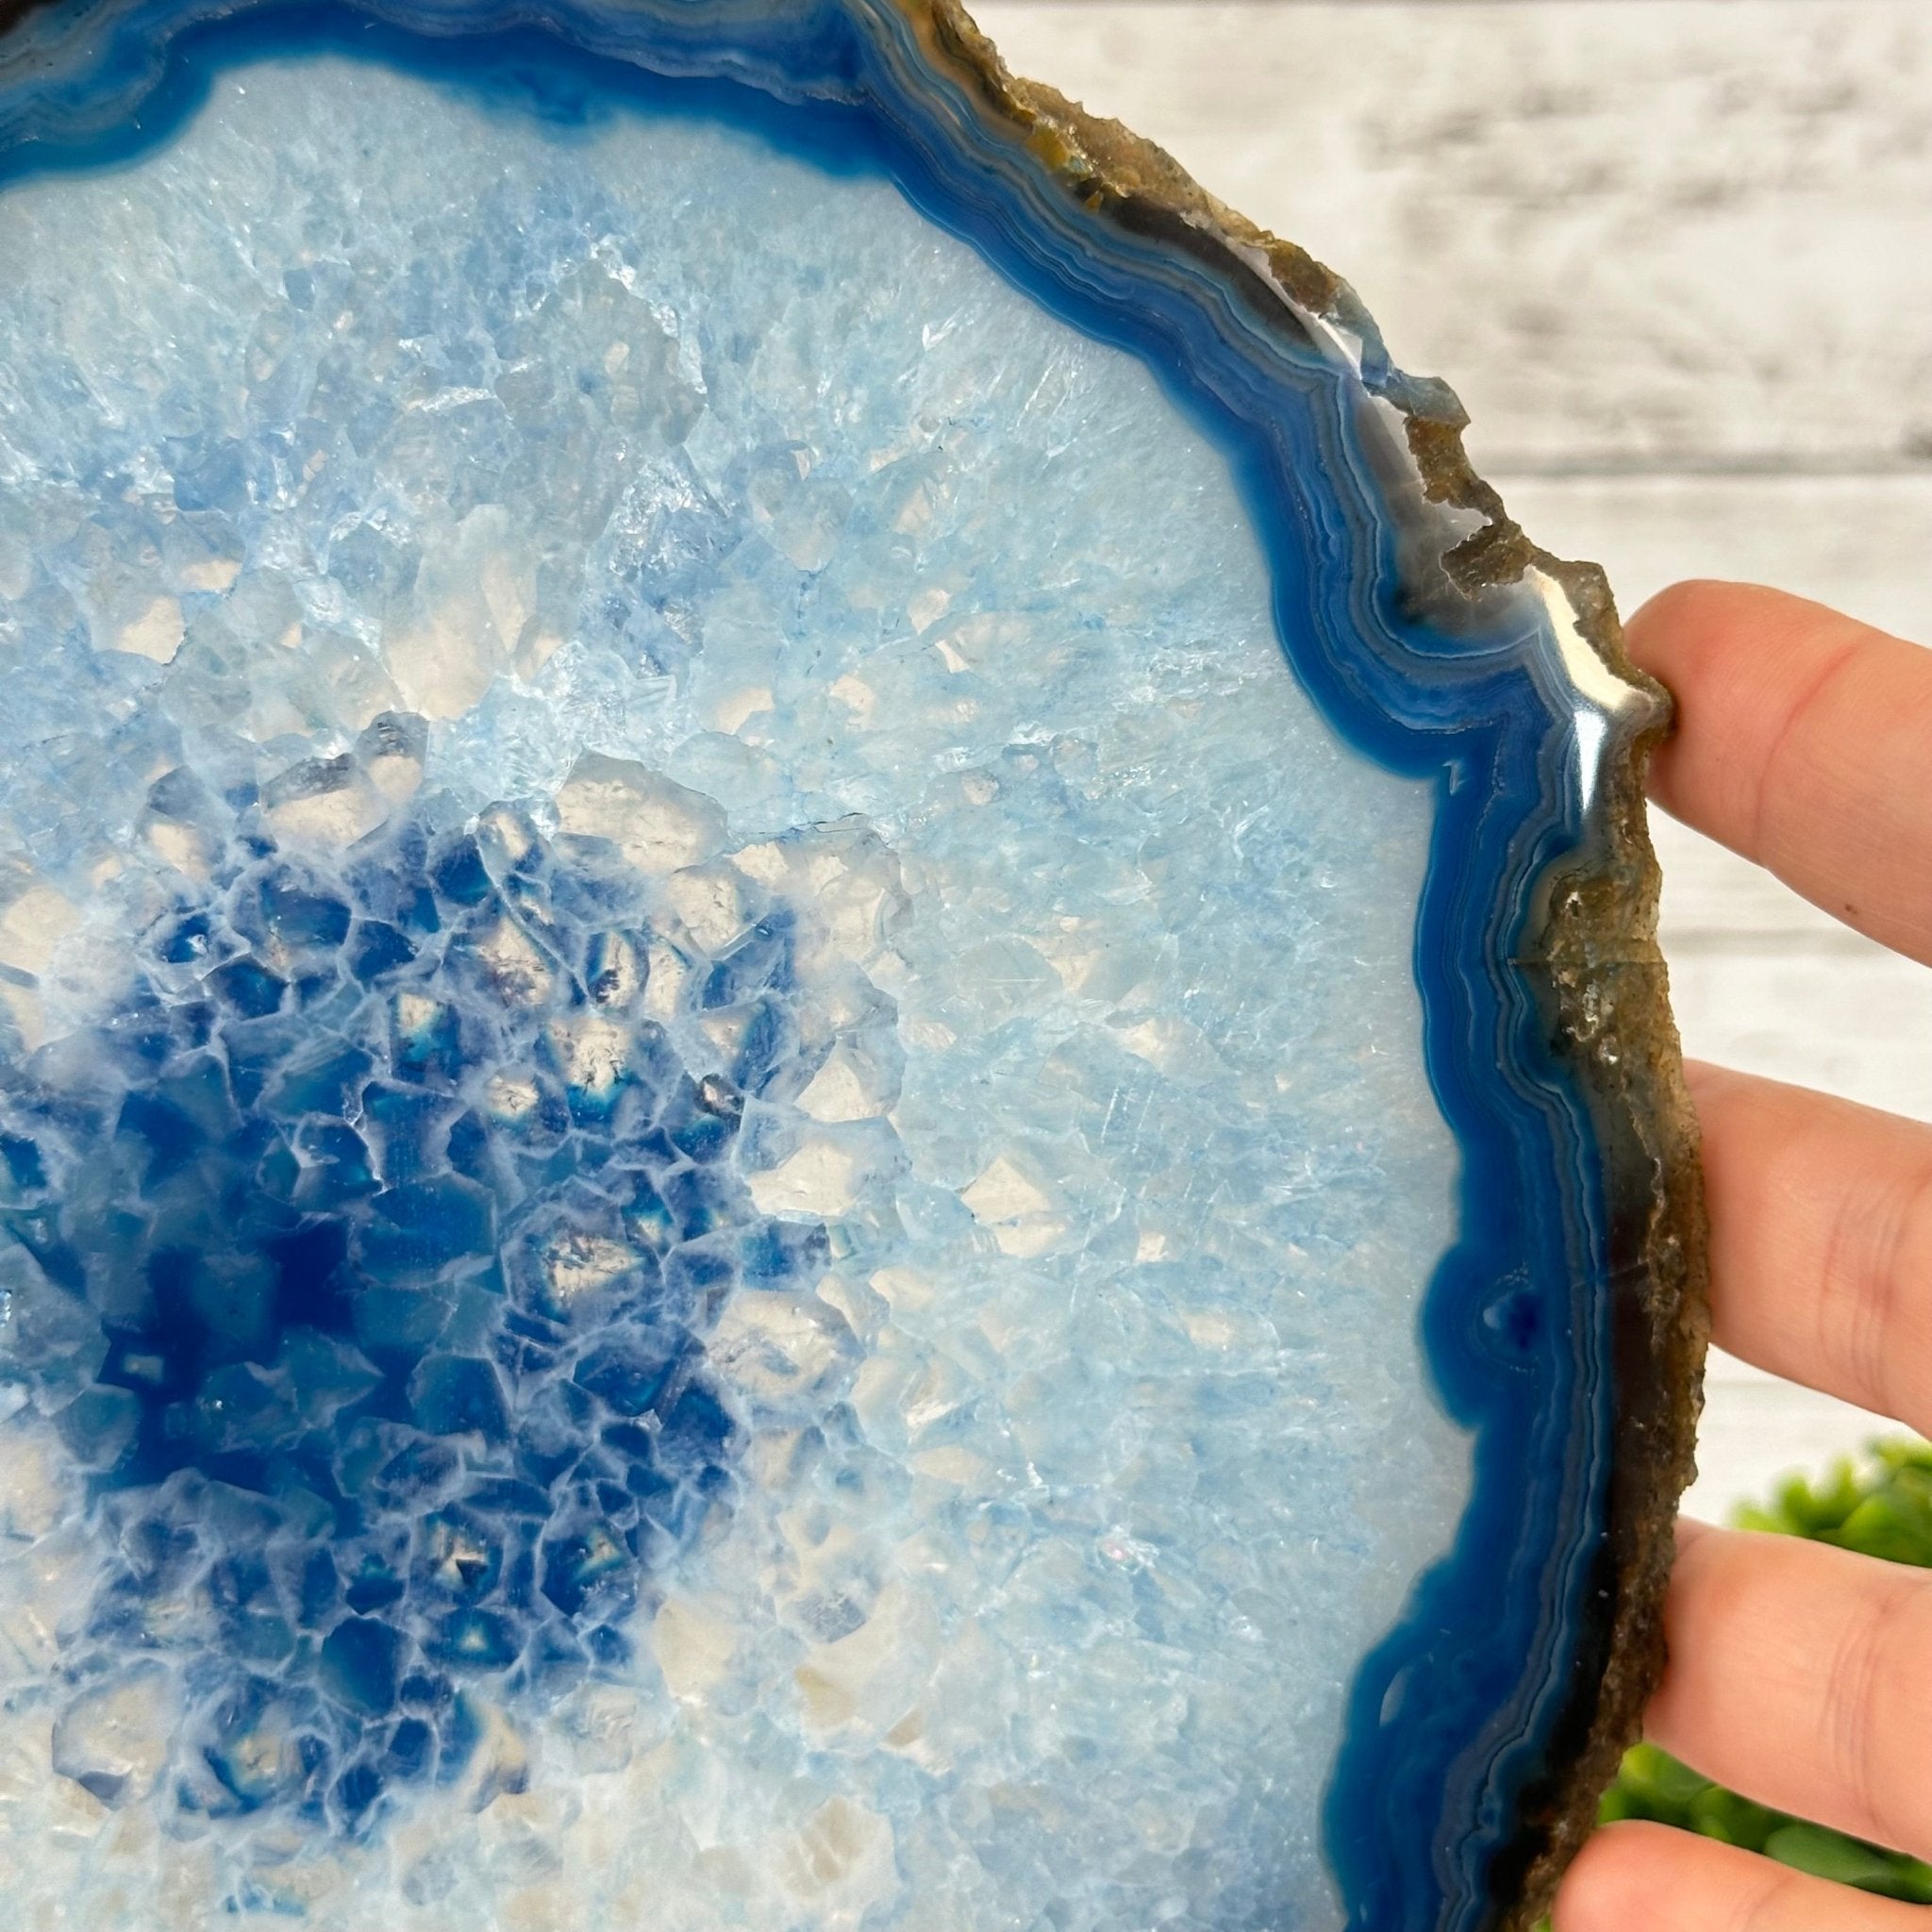 Brazilian Blue Agate Slice on a Metal Stand, 11.7" Tall #5055-0136 - Brazil GemsBrazil GemsBrazilian Blue Agate Slice on a Metal Stand, 11.7" Tall #5055-0136Slices on Fixed Bases5055-0136